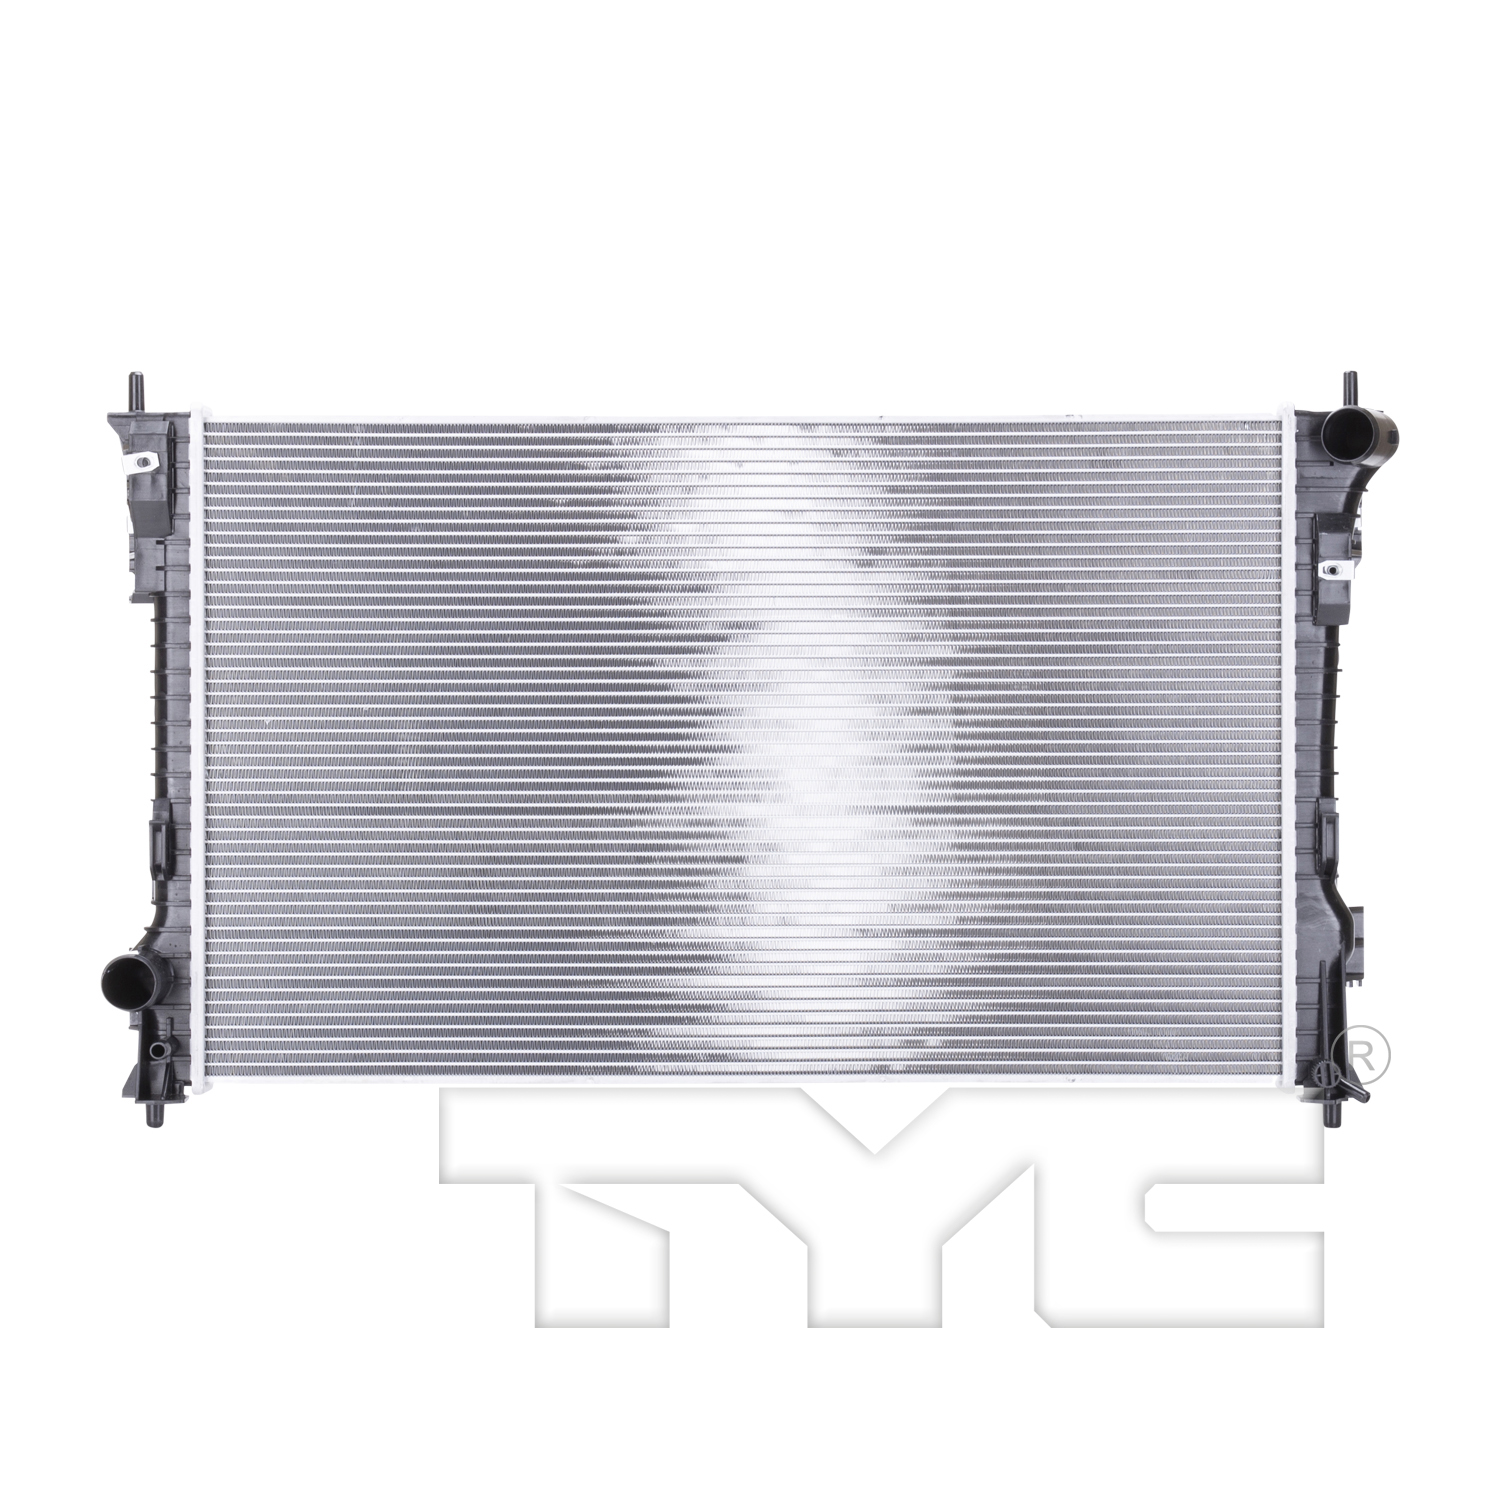 Aftermarket RADIATORS for FORD - POLICE INTERCEPTOR UTILITY, POLICE INTERCEPTOR UTILITY,13-19,Radiator assembly